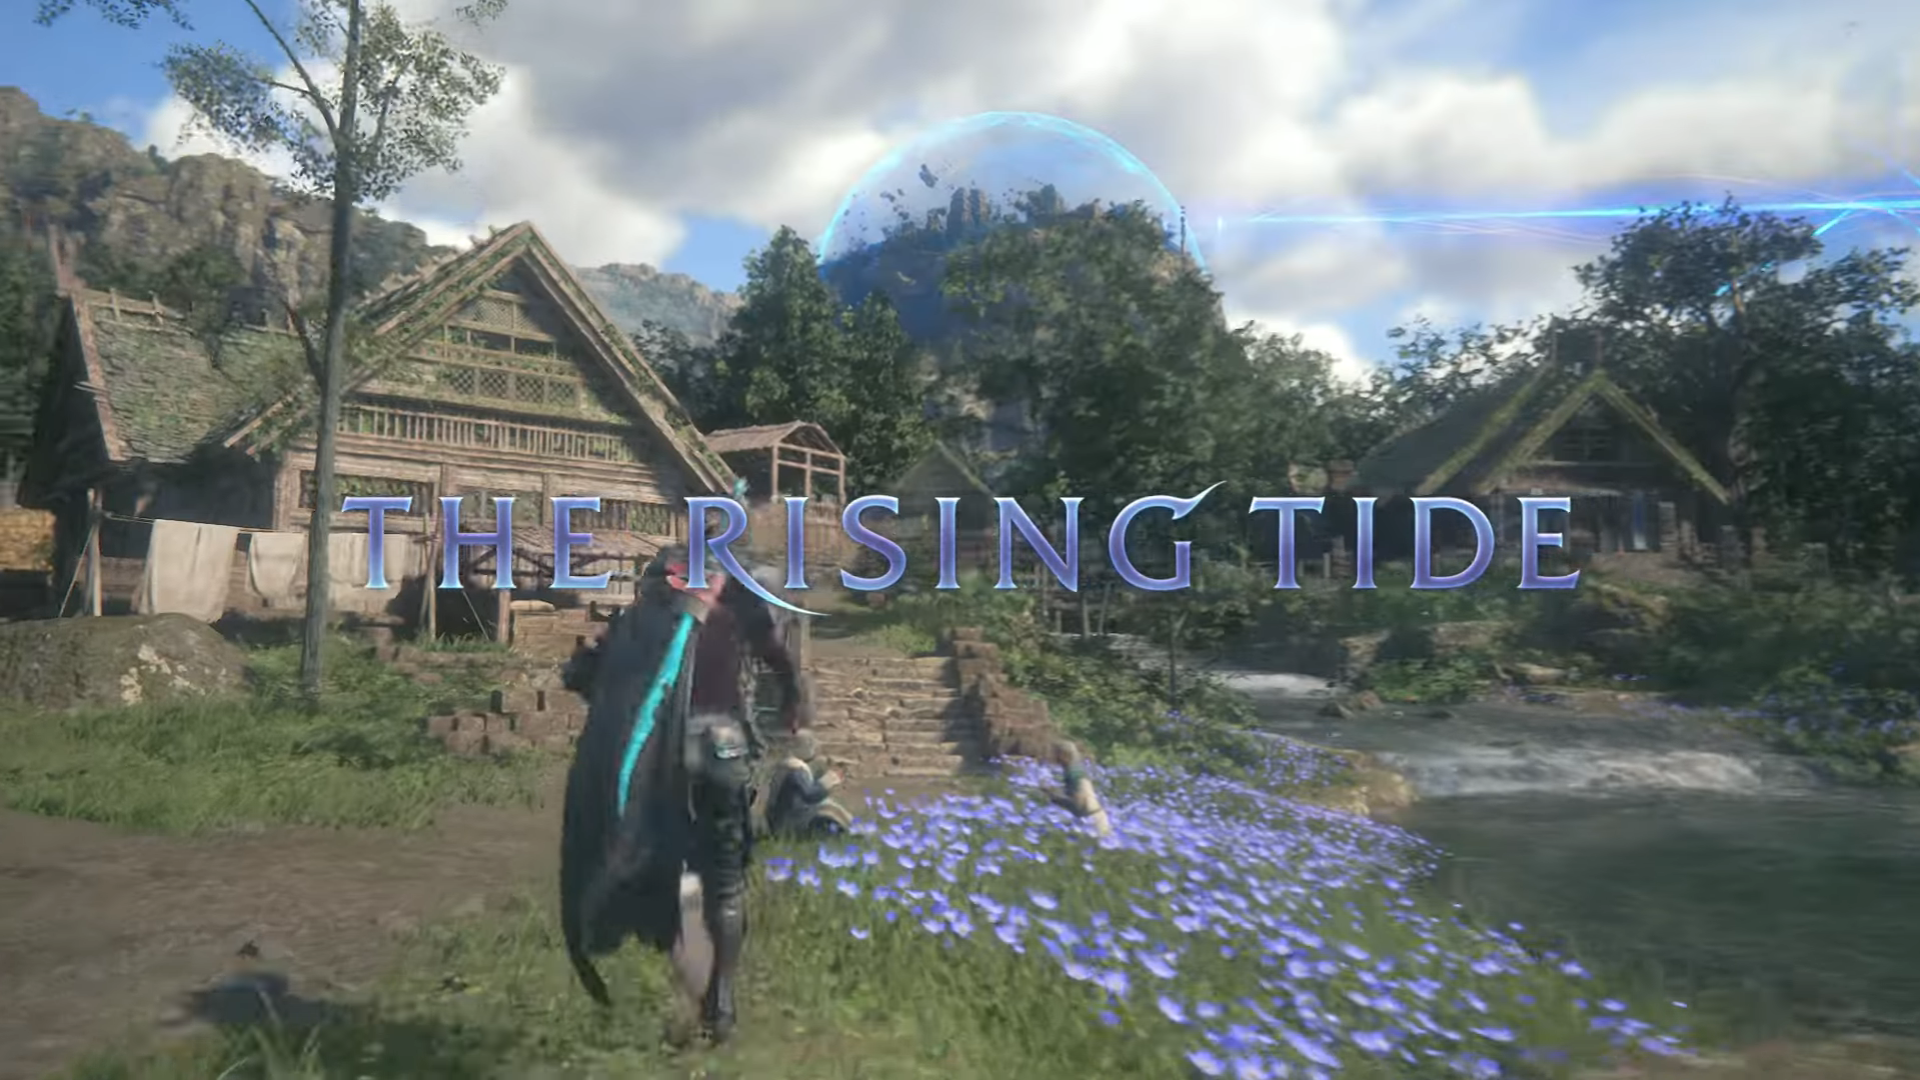 Final Fantasy XVI The Rising Tide DLC Expected to Take 10 Hours, Says Director